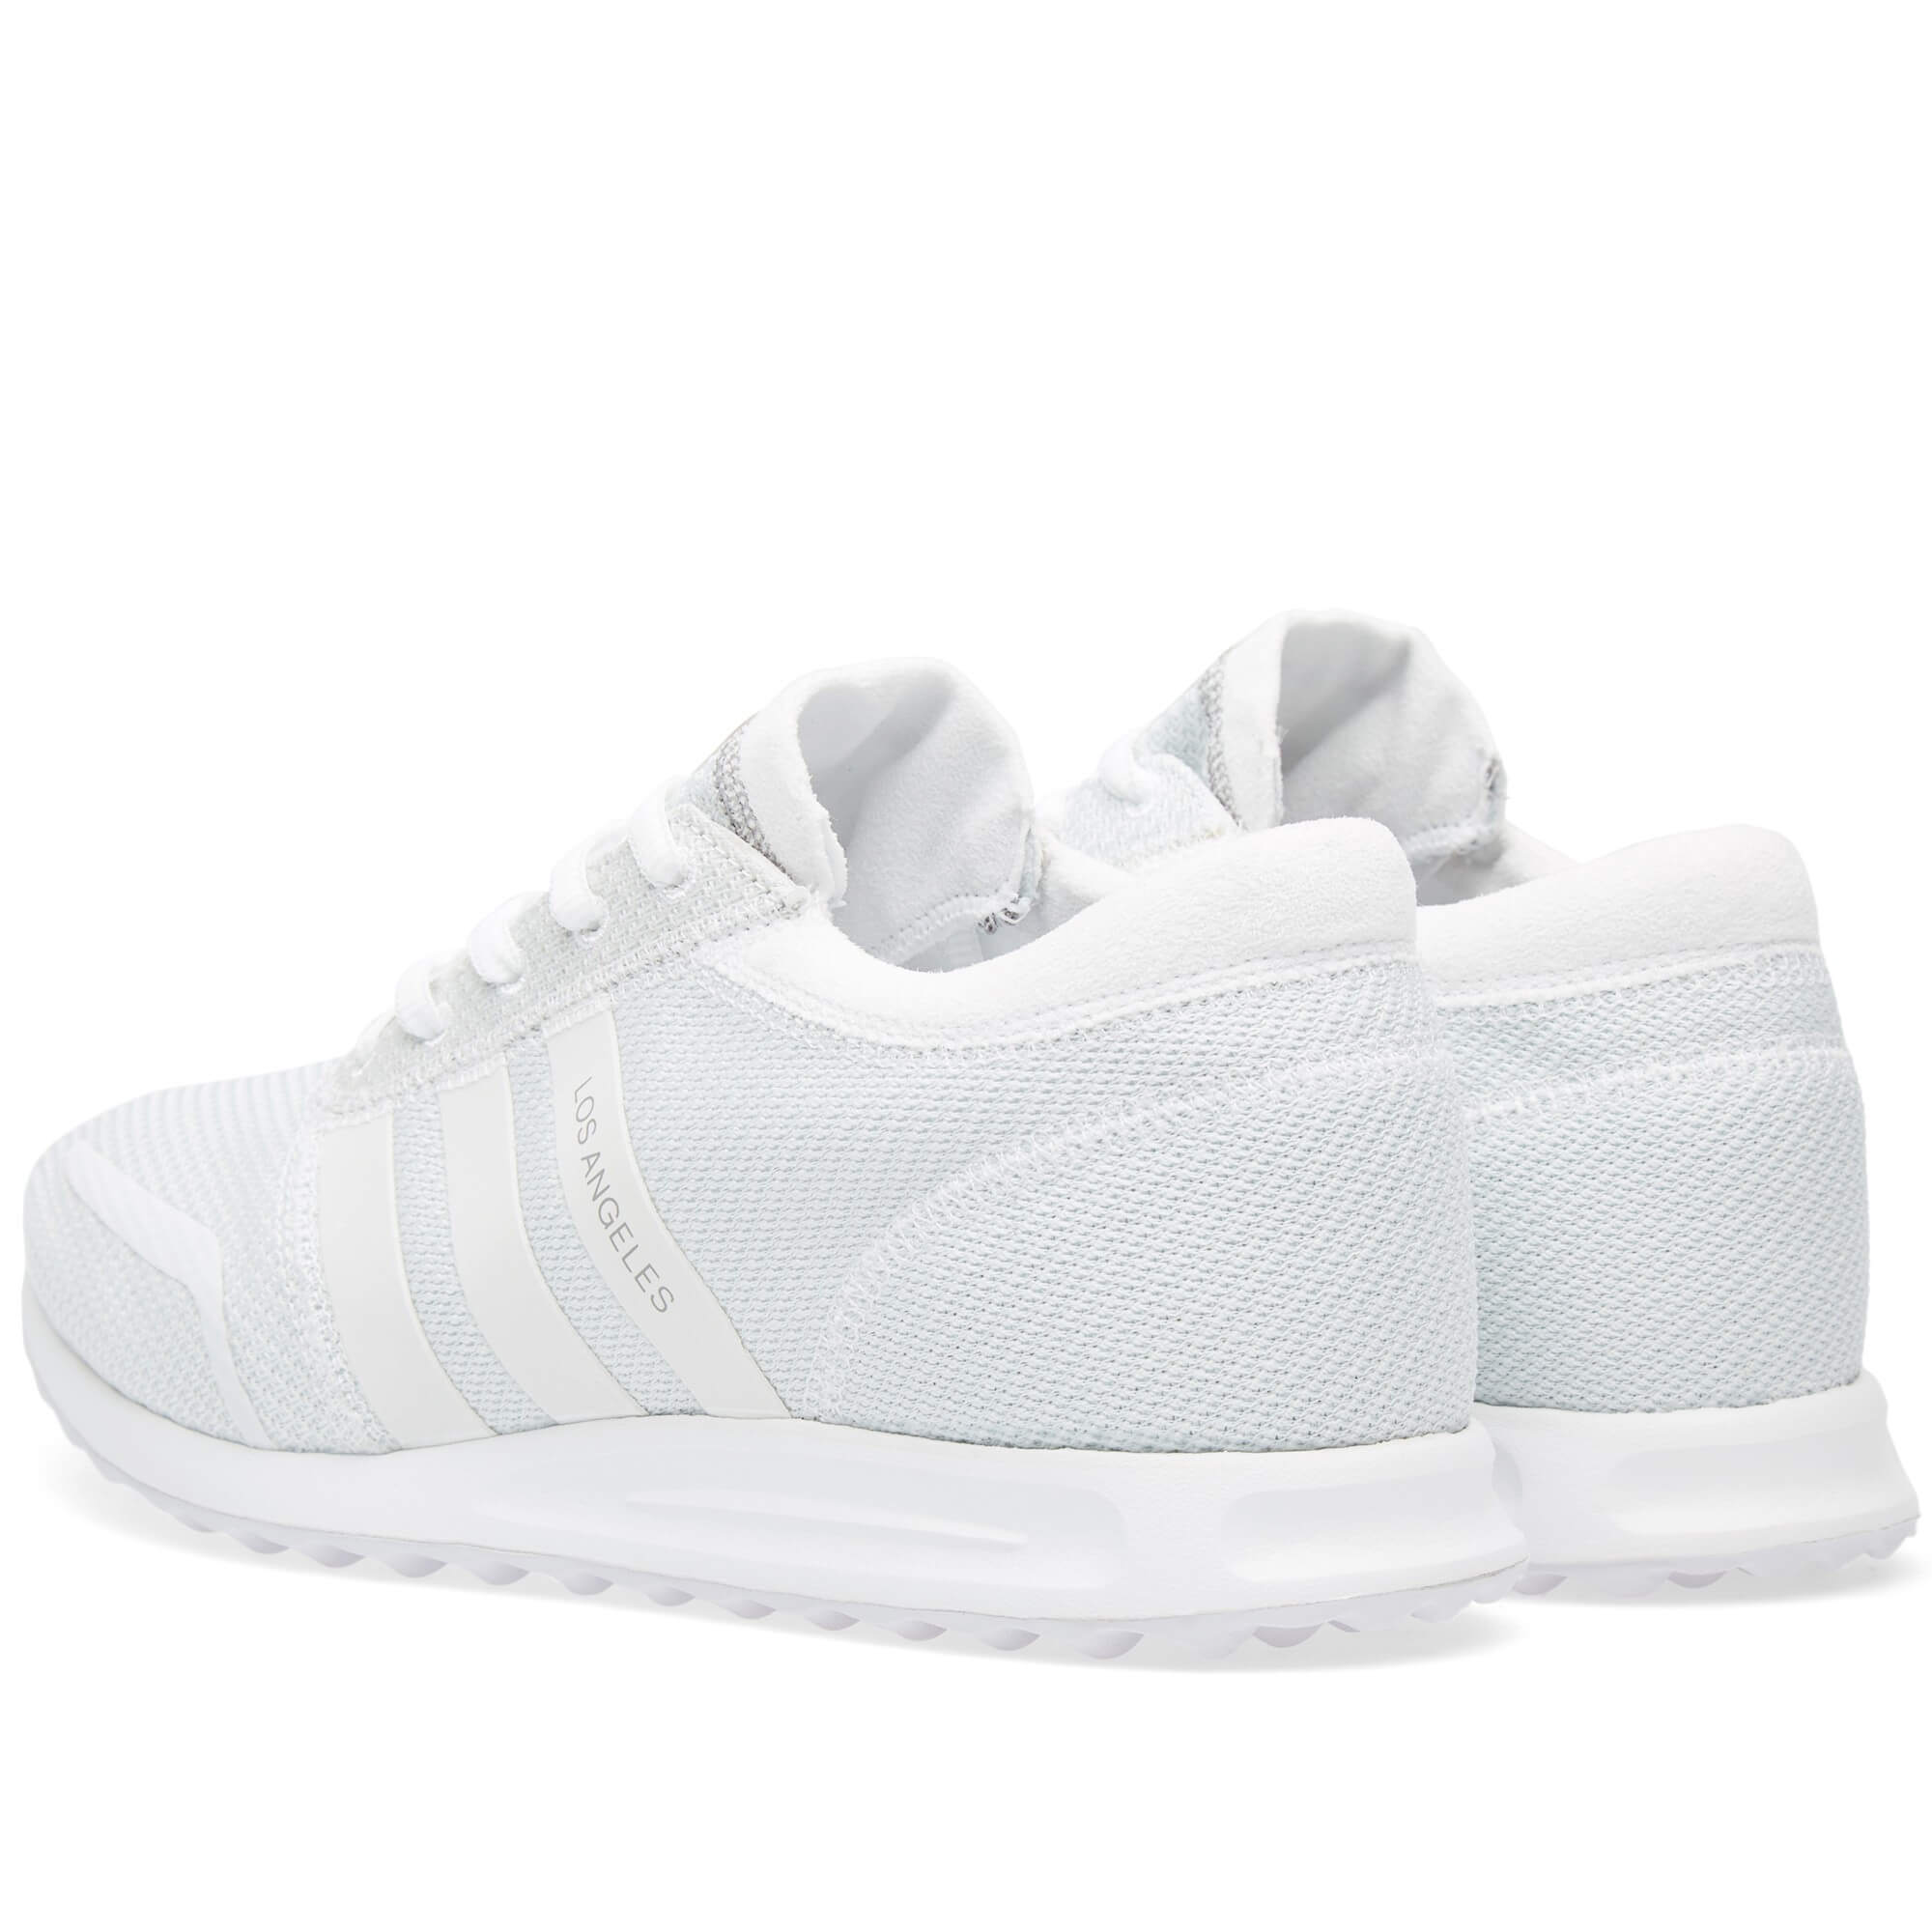 adidas los angeles trainers white